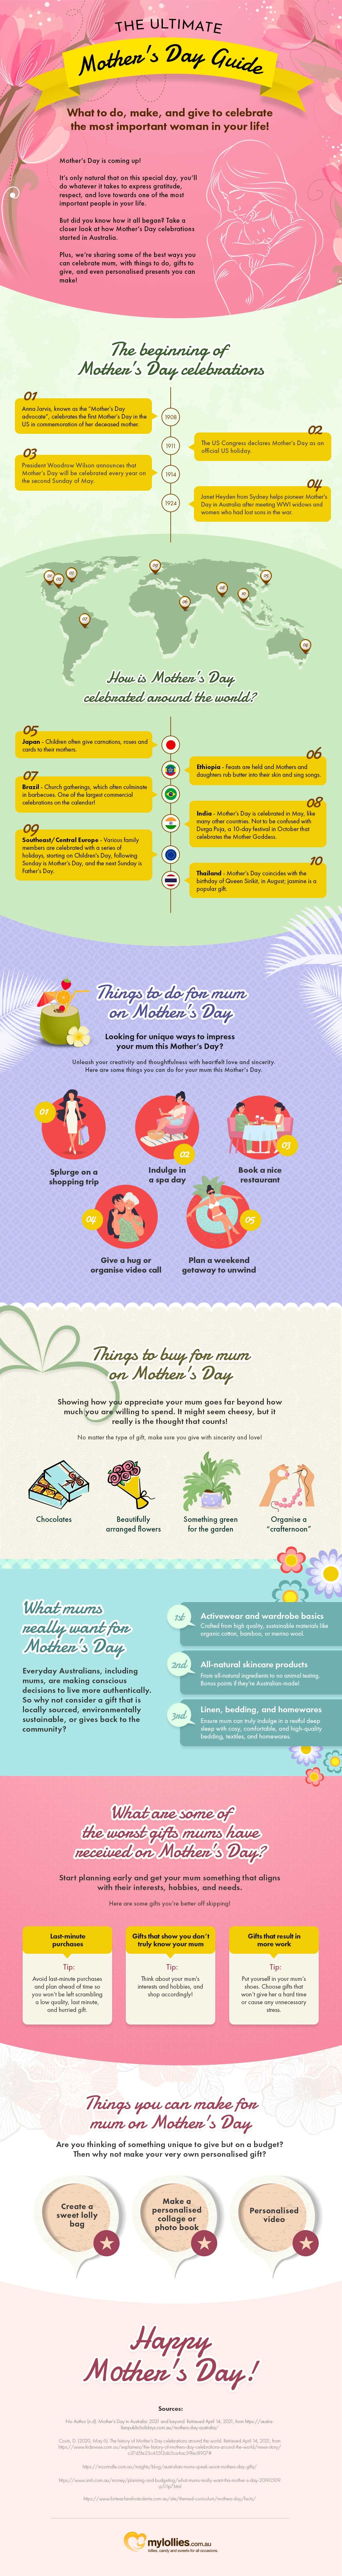 The Ultimate Mother's Day Guide